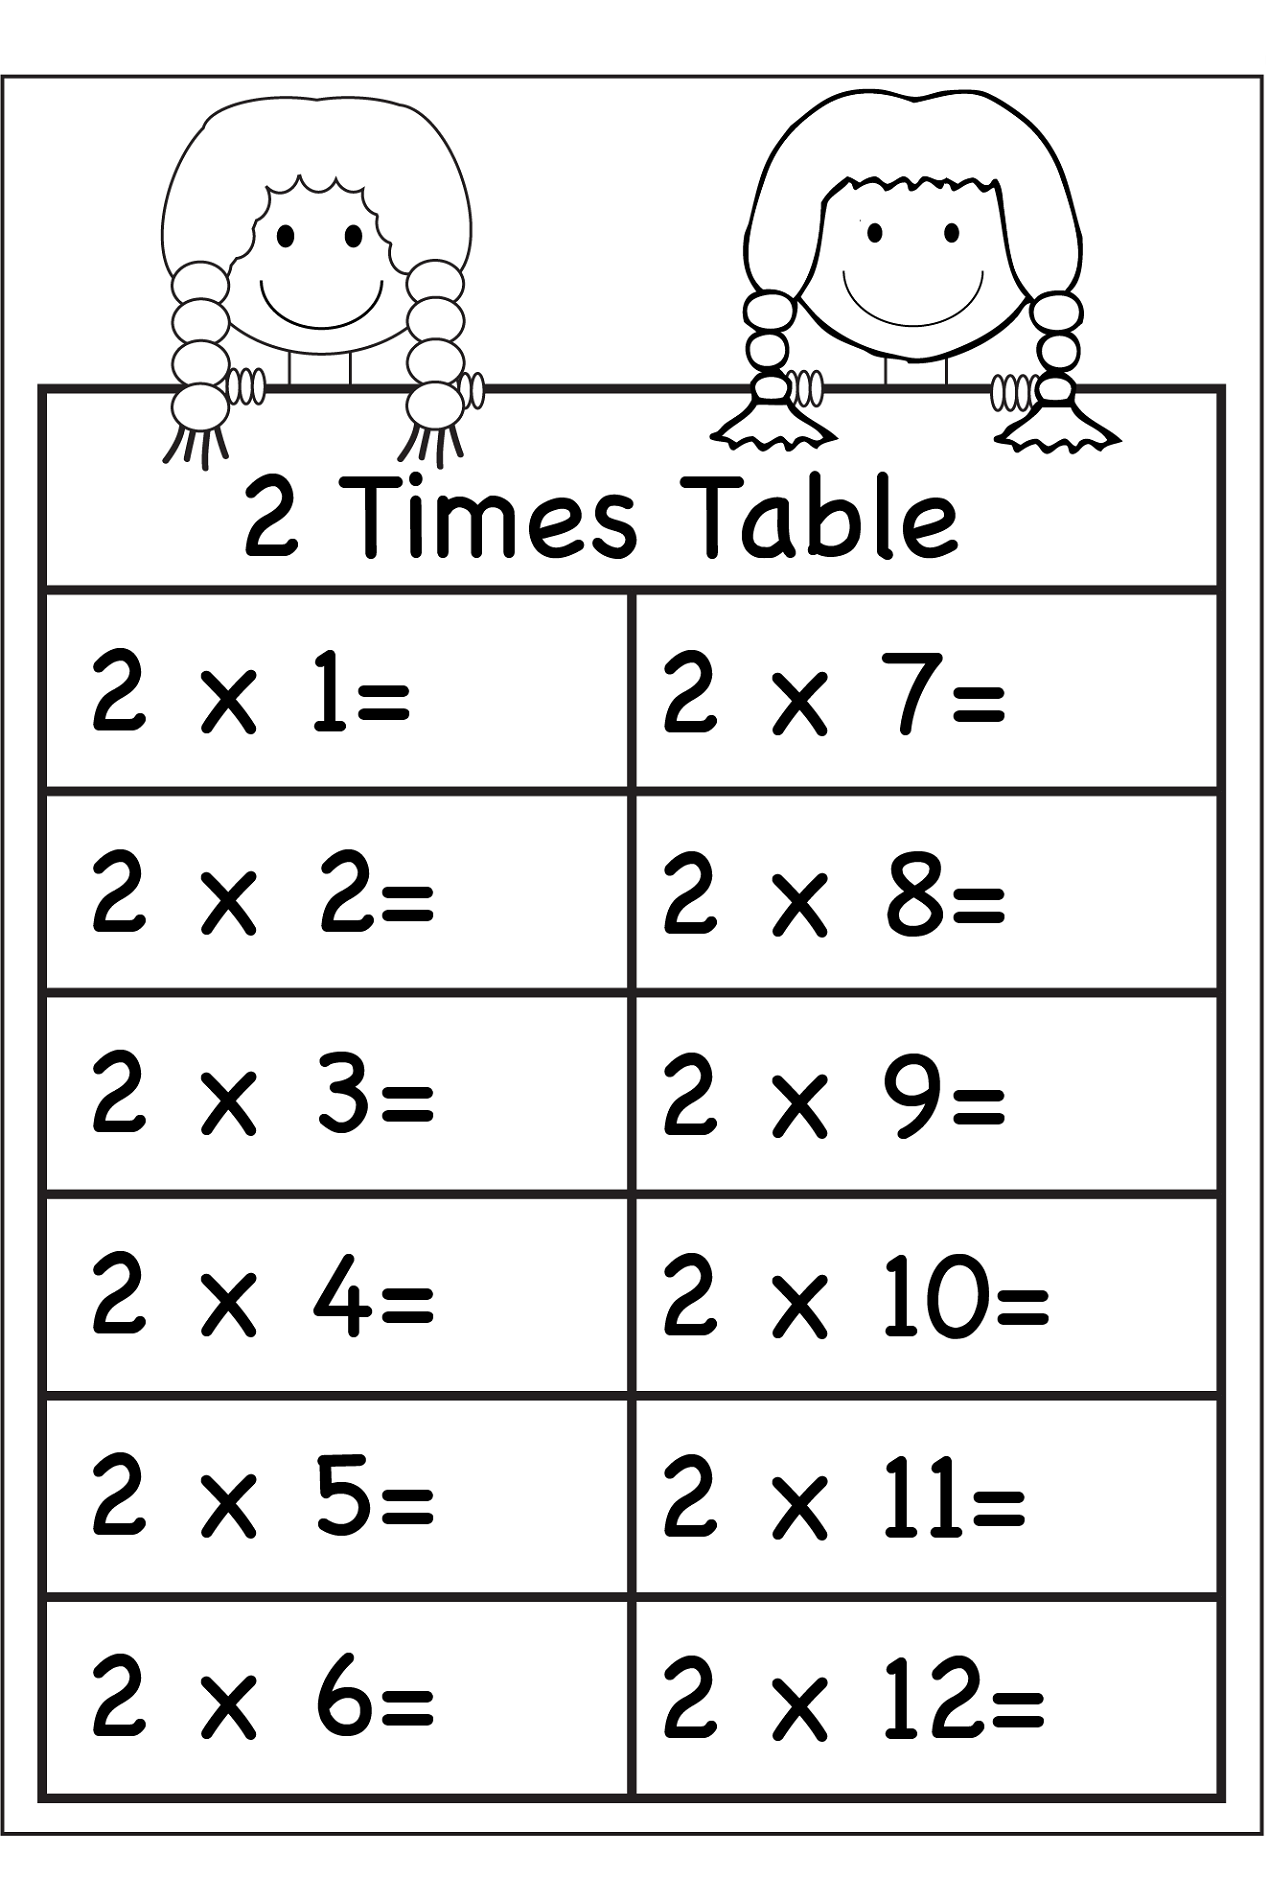 printable-2-times-table-worksheets-activity-shelter